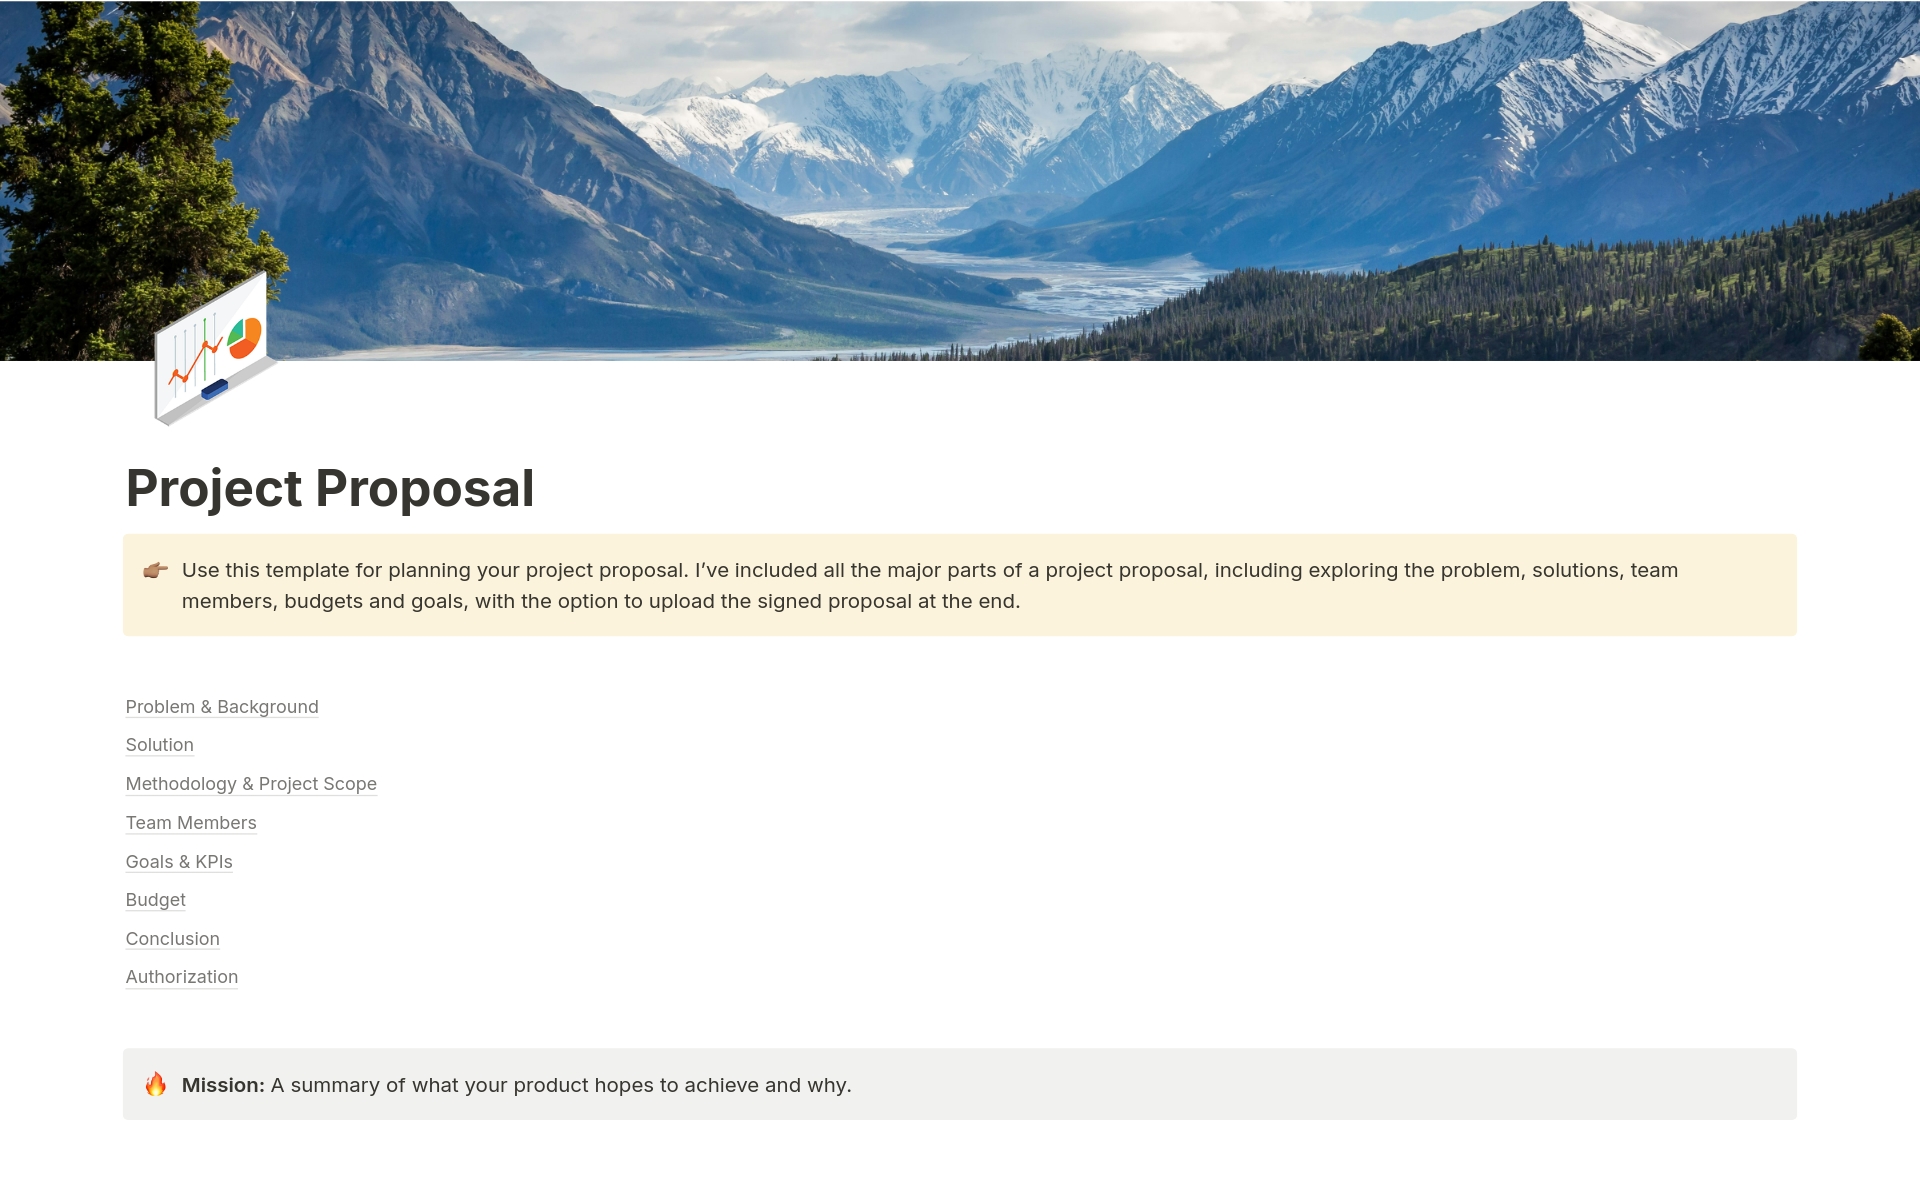 Create your entire project proposal in one page.